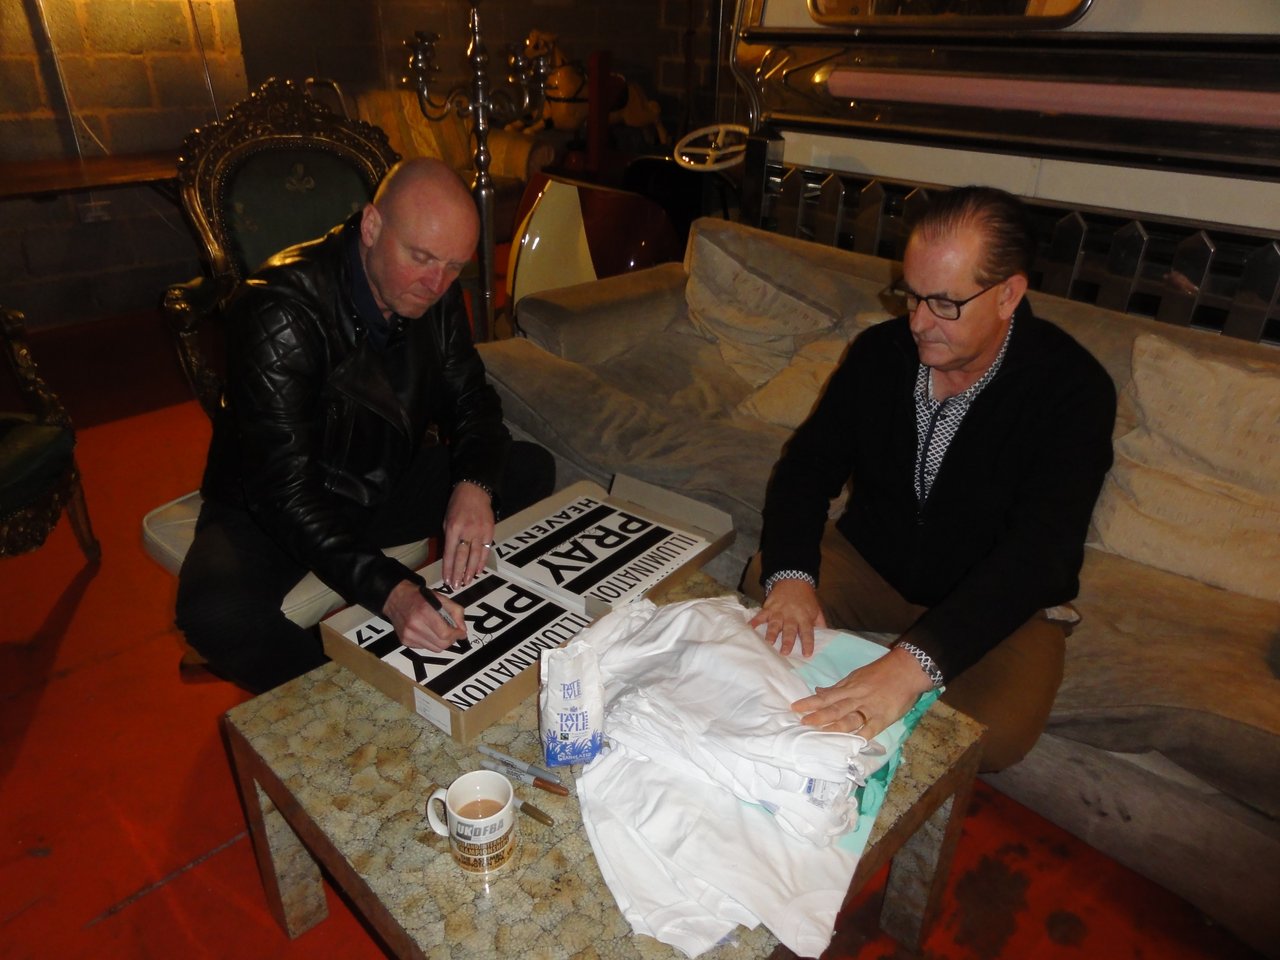 17 Glenn and Martyn the signing new single.jpg